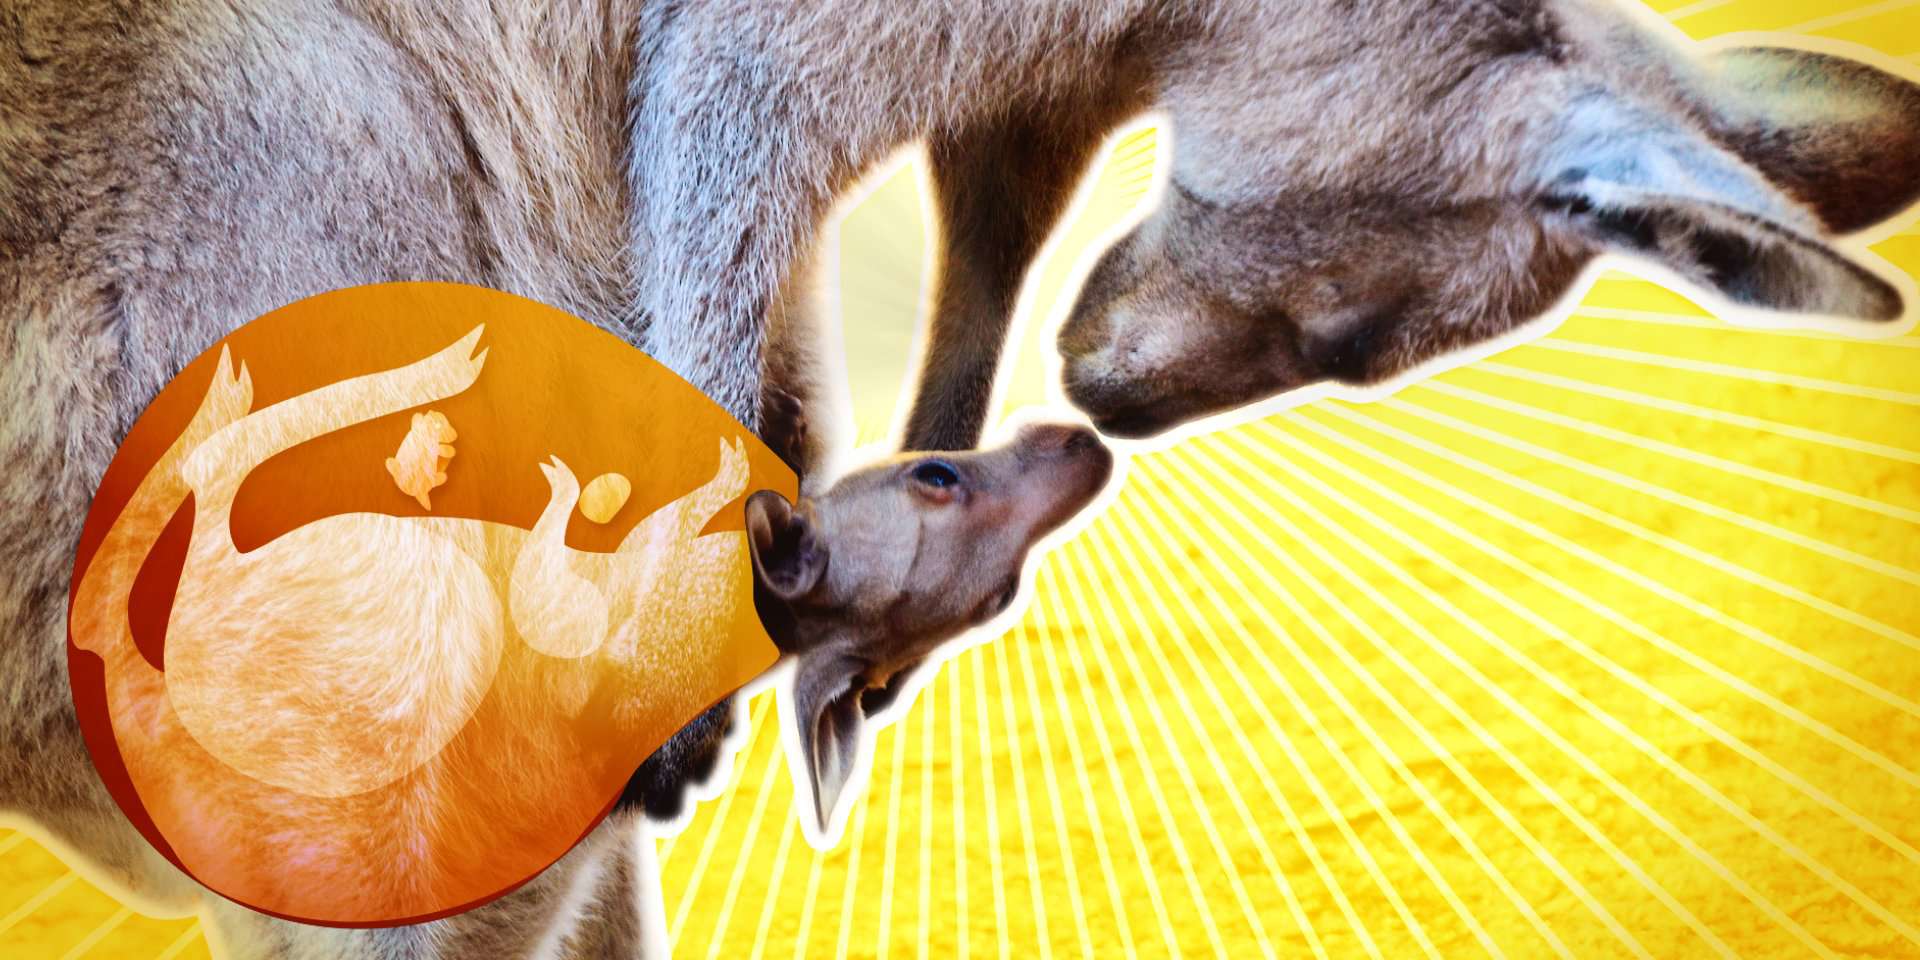 Taboola Ad Example 57329 - A Kangaroo's Pouch Is Far More Complex Than You May Think. It Produces Custom Milk And Antimicrobial Sweat.